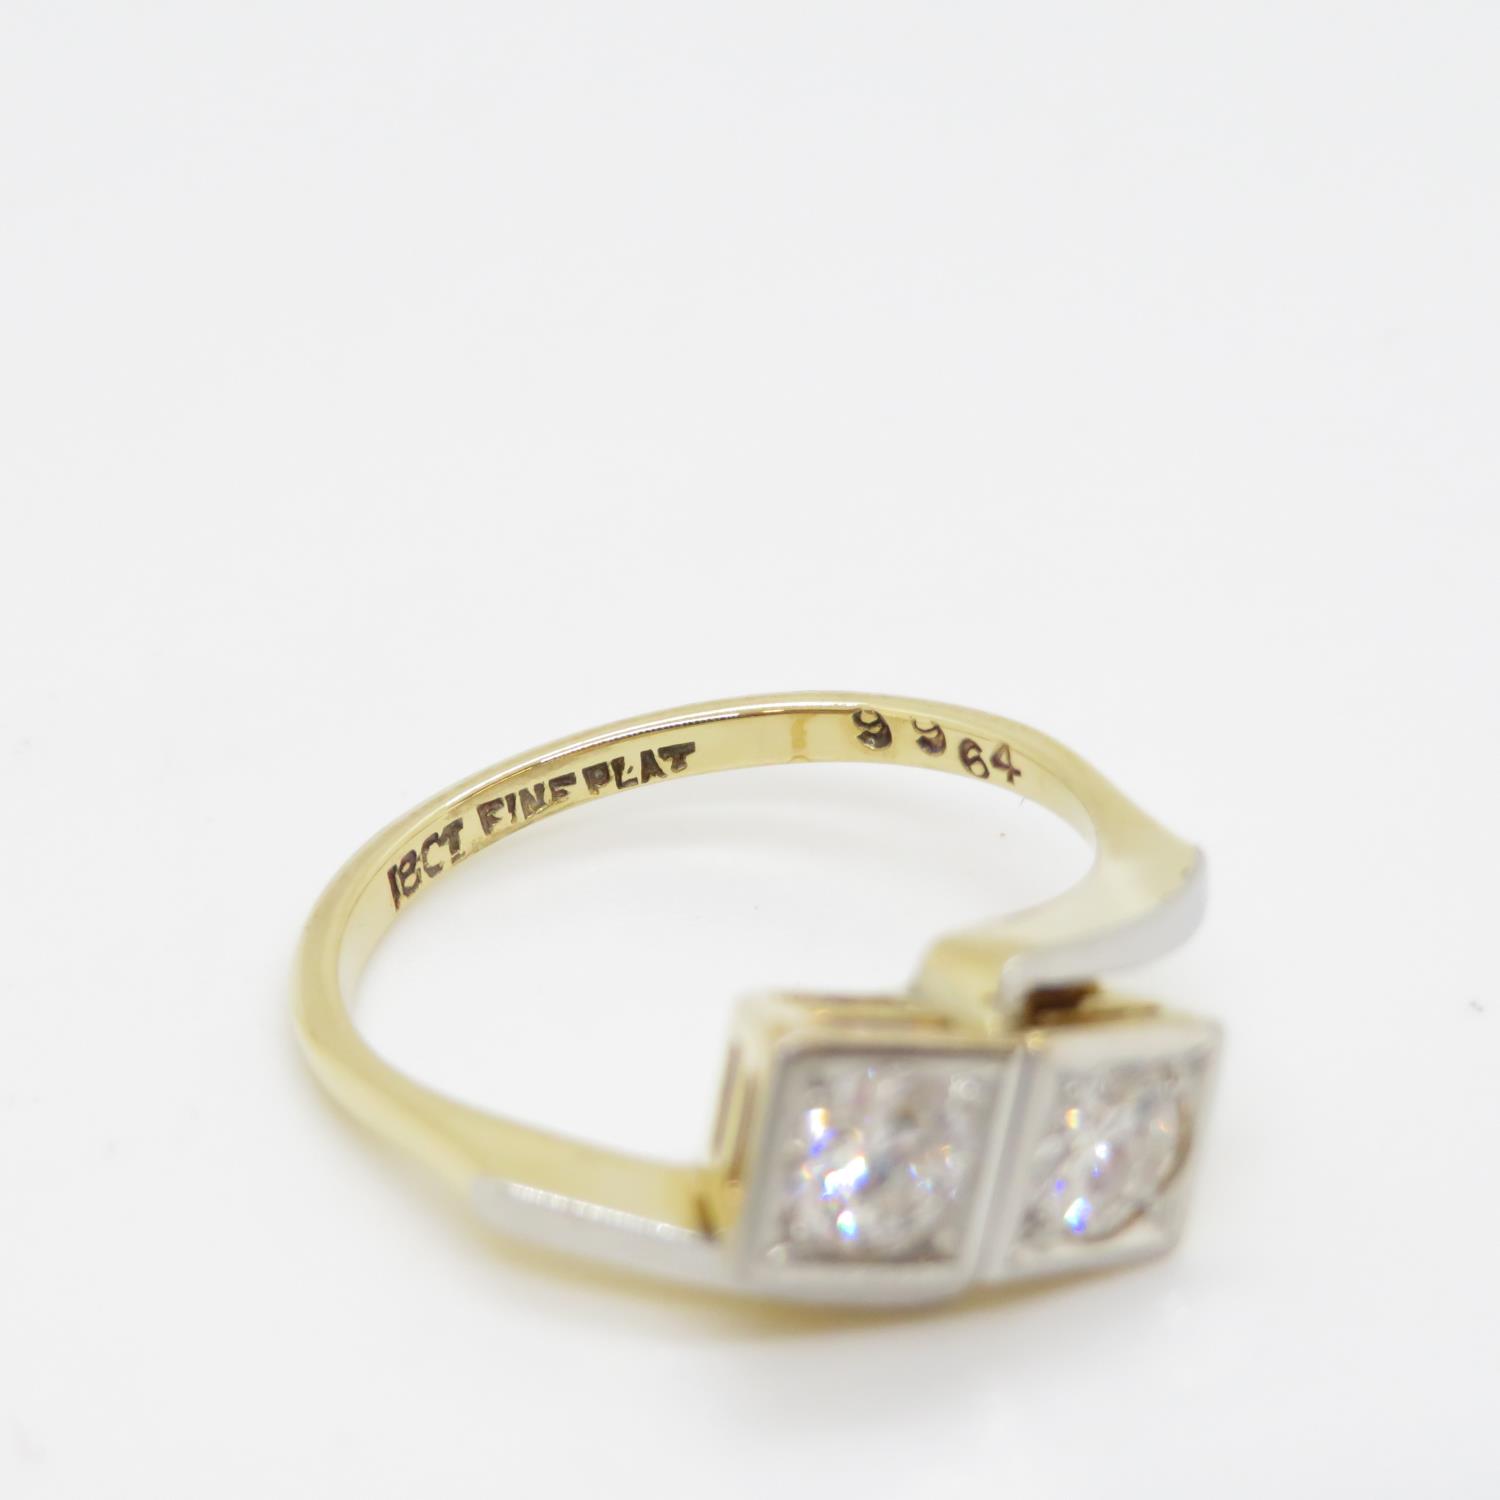 Antique 18ct two stone diamond ring each stone approx .3ct 3.48g good diamonds size M - Image 3 of 3